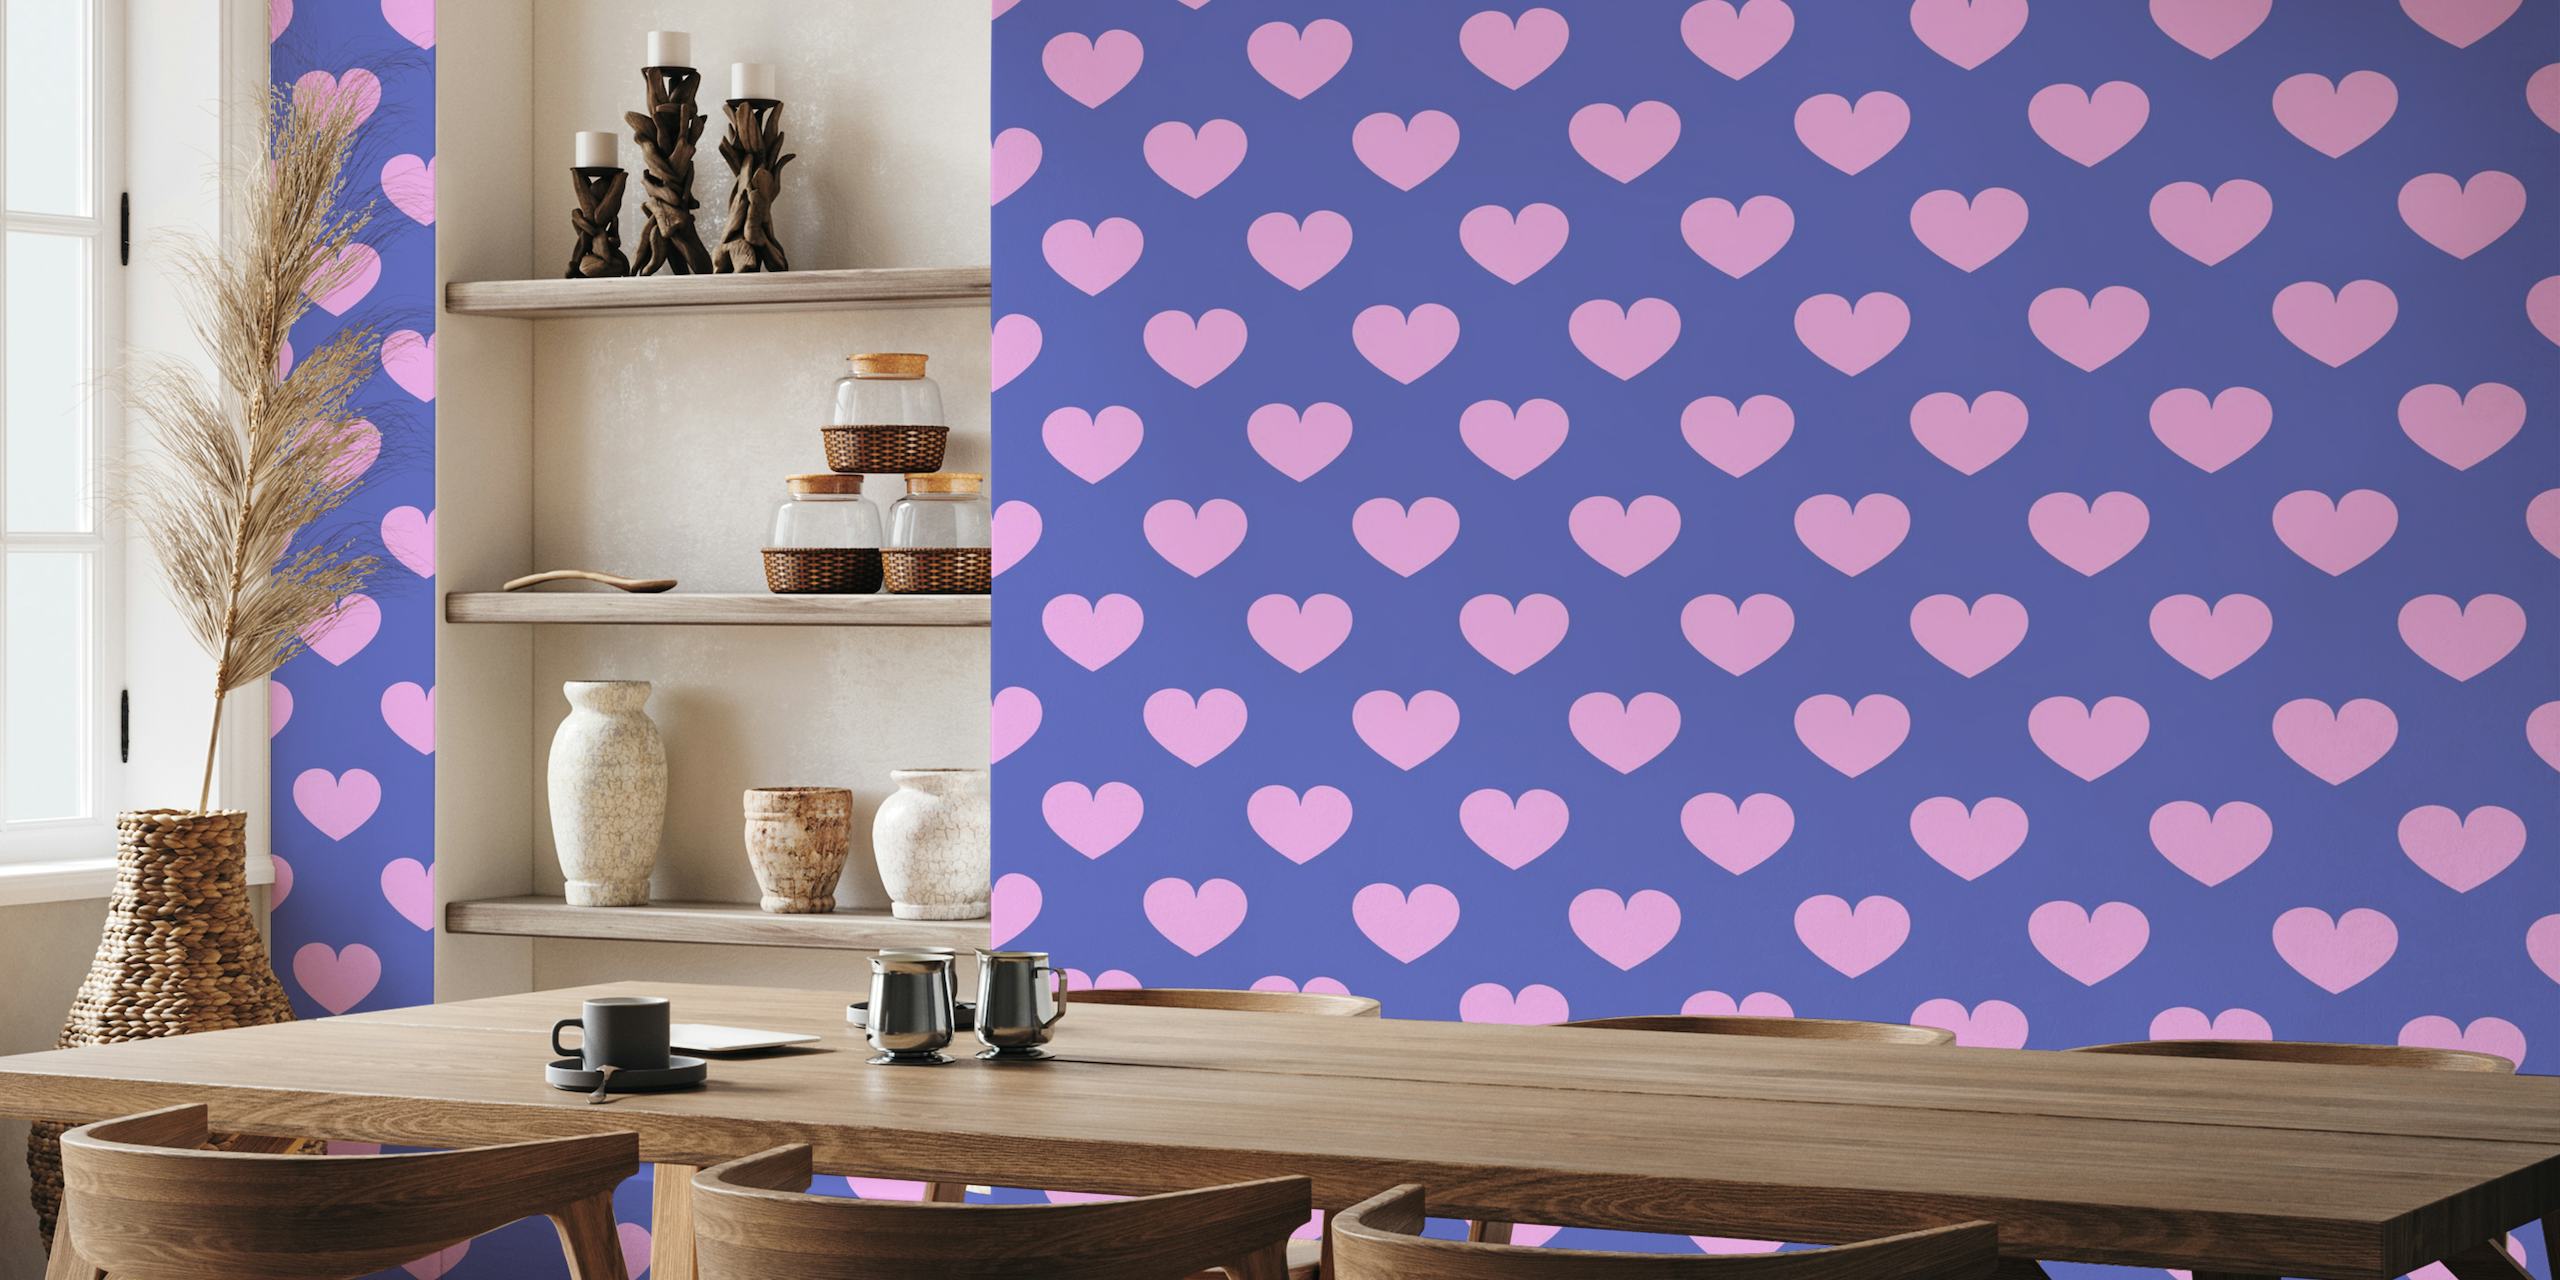 Retro Hearts Pattern in Pink and Purple wallpaper